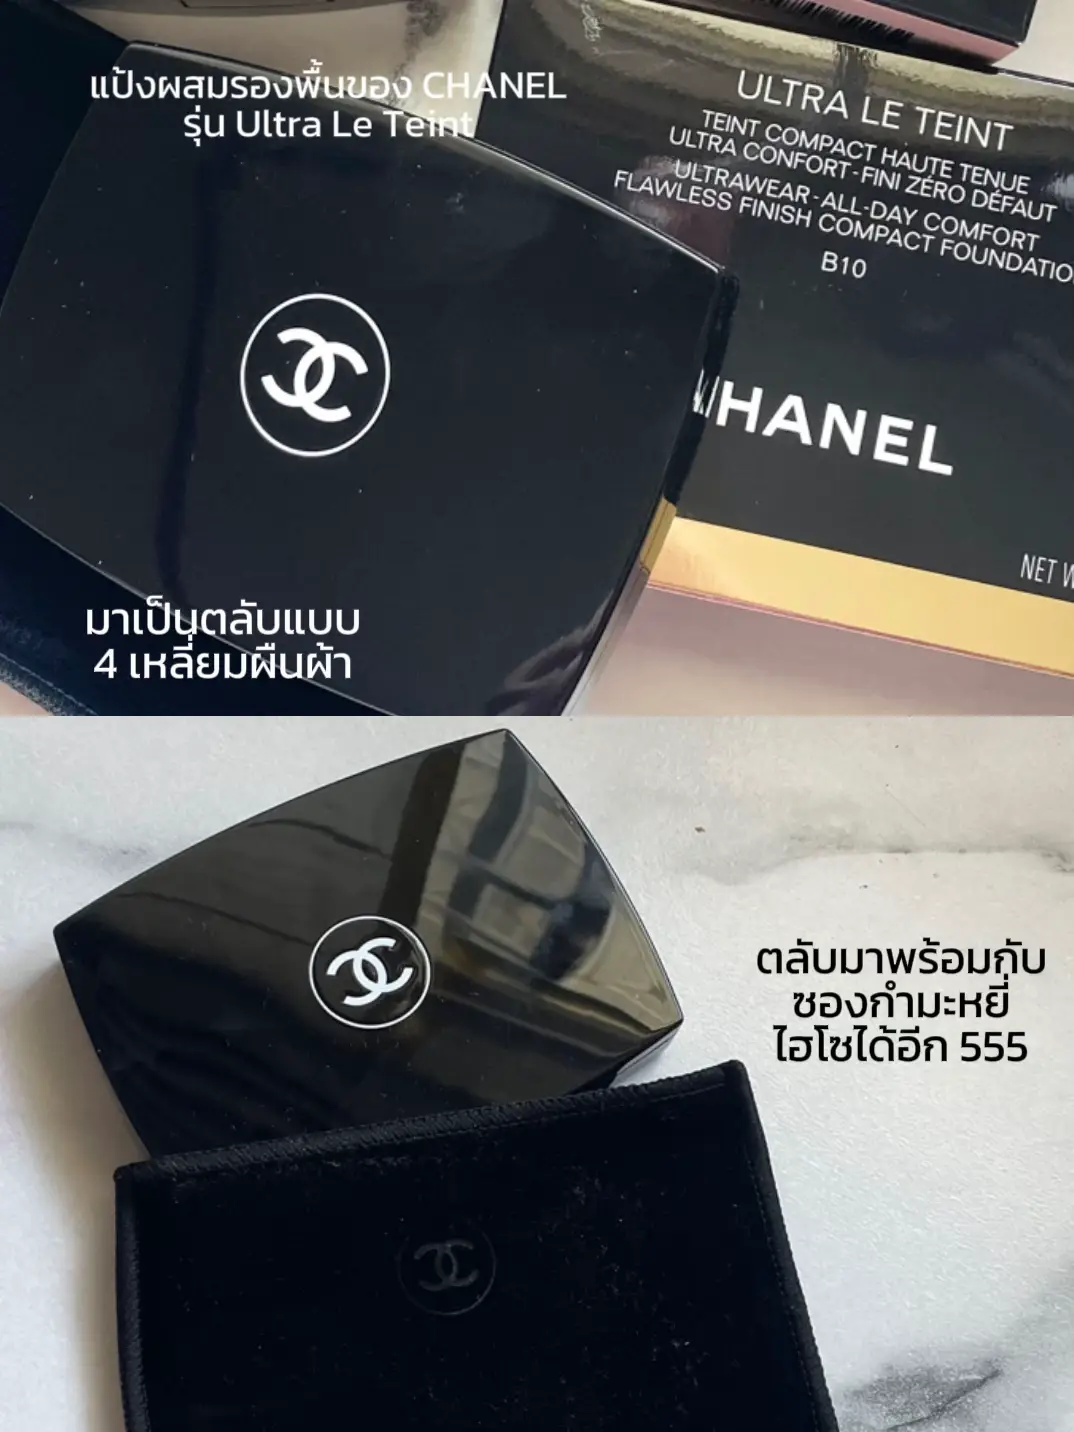 CHANEL Ultra Le Teint Review Powder Mixed Foundation Fine Style ❤️, Gallery posted by lipstickfairy